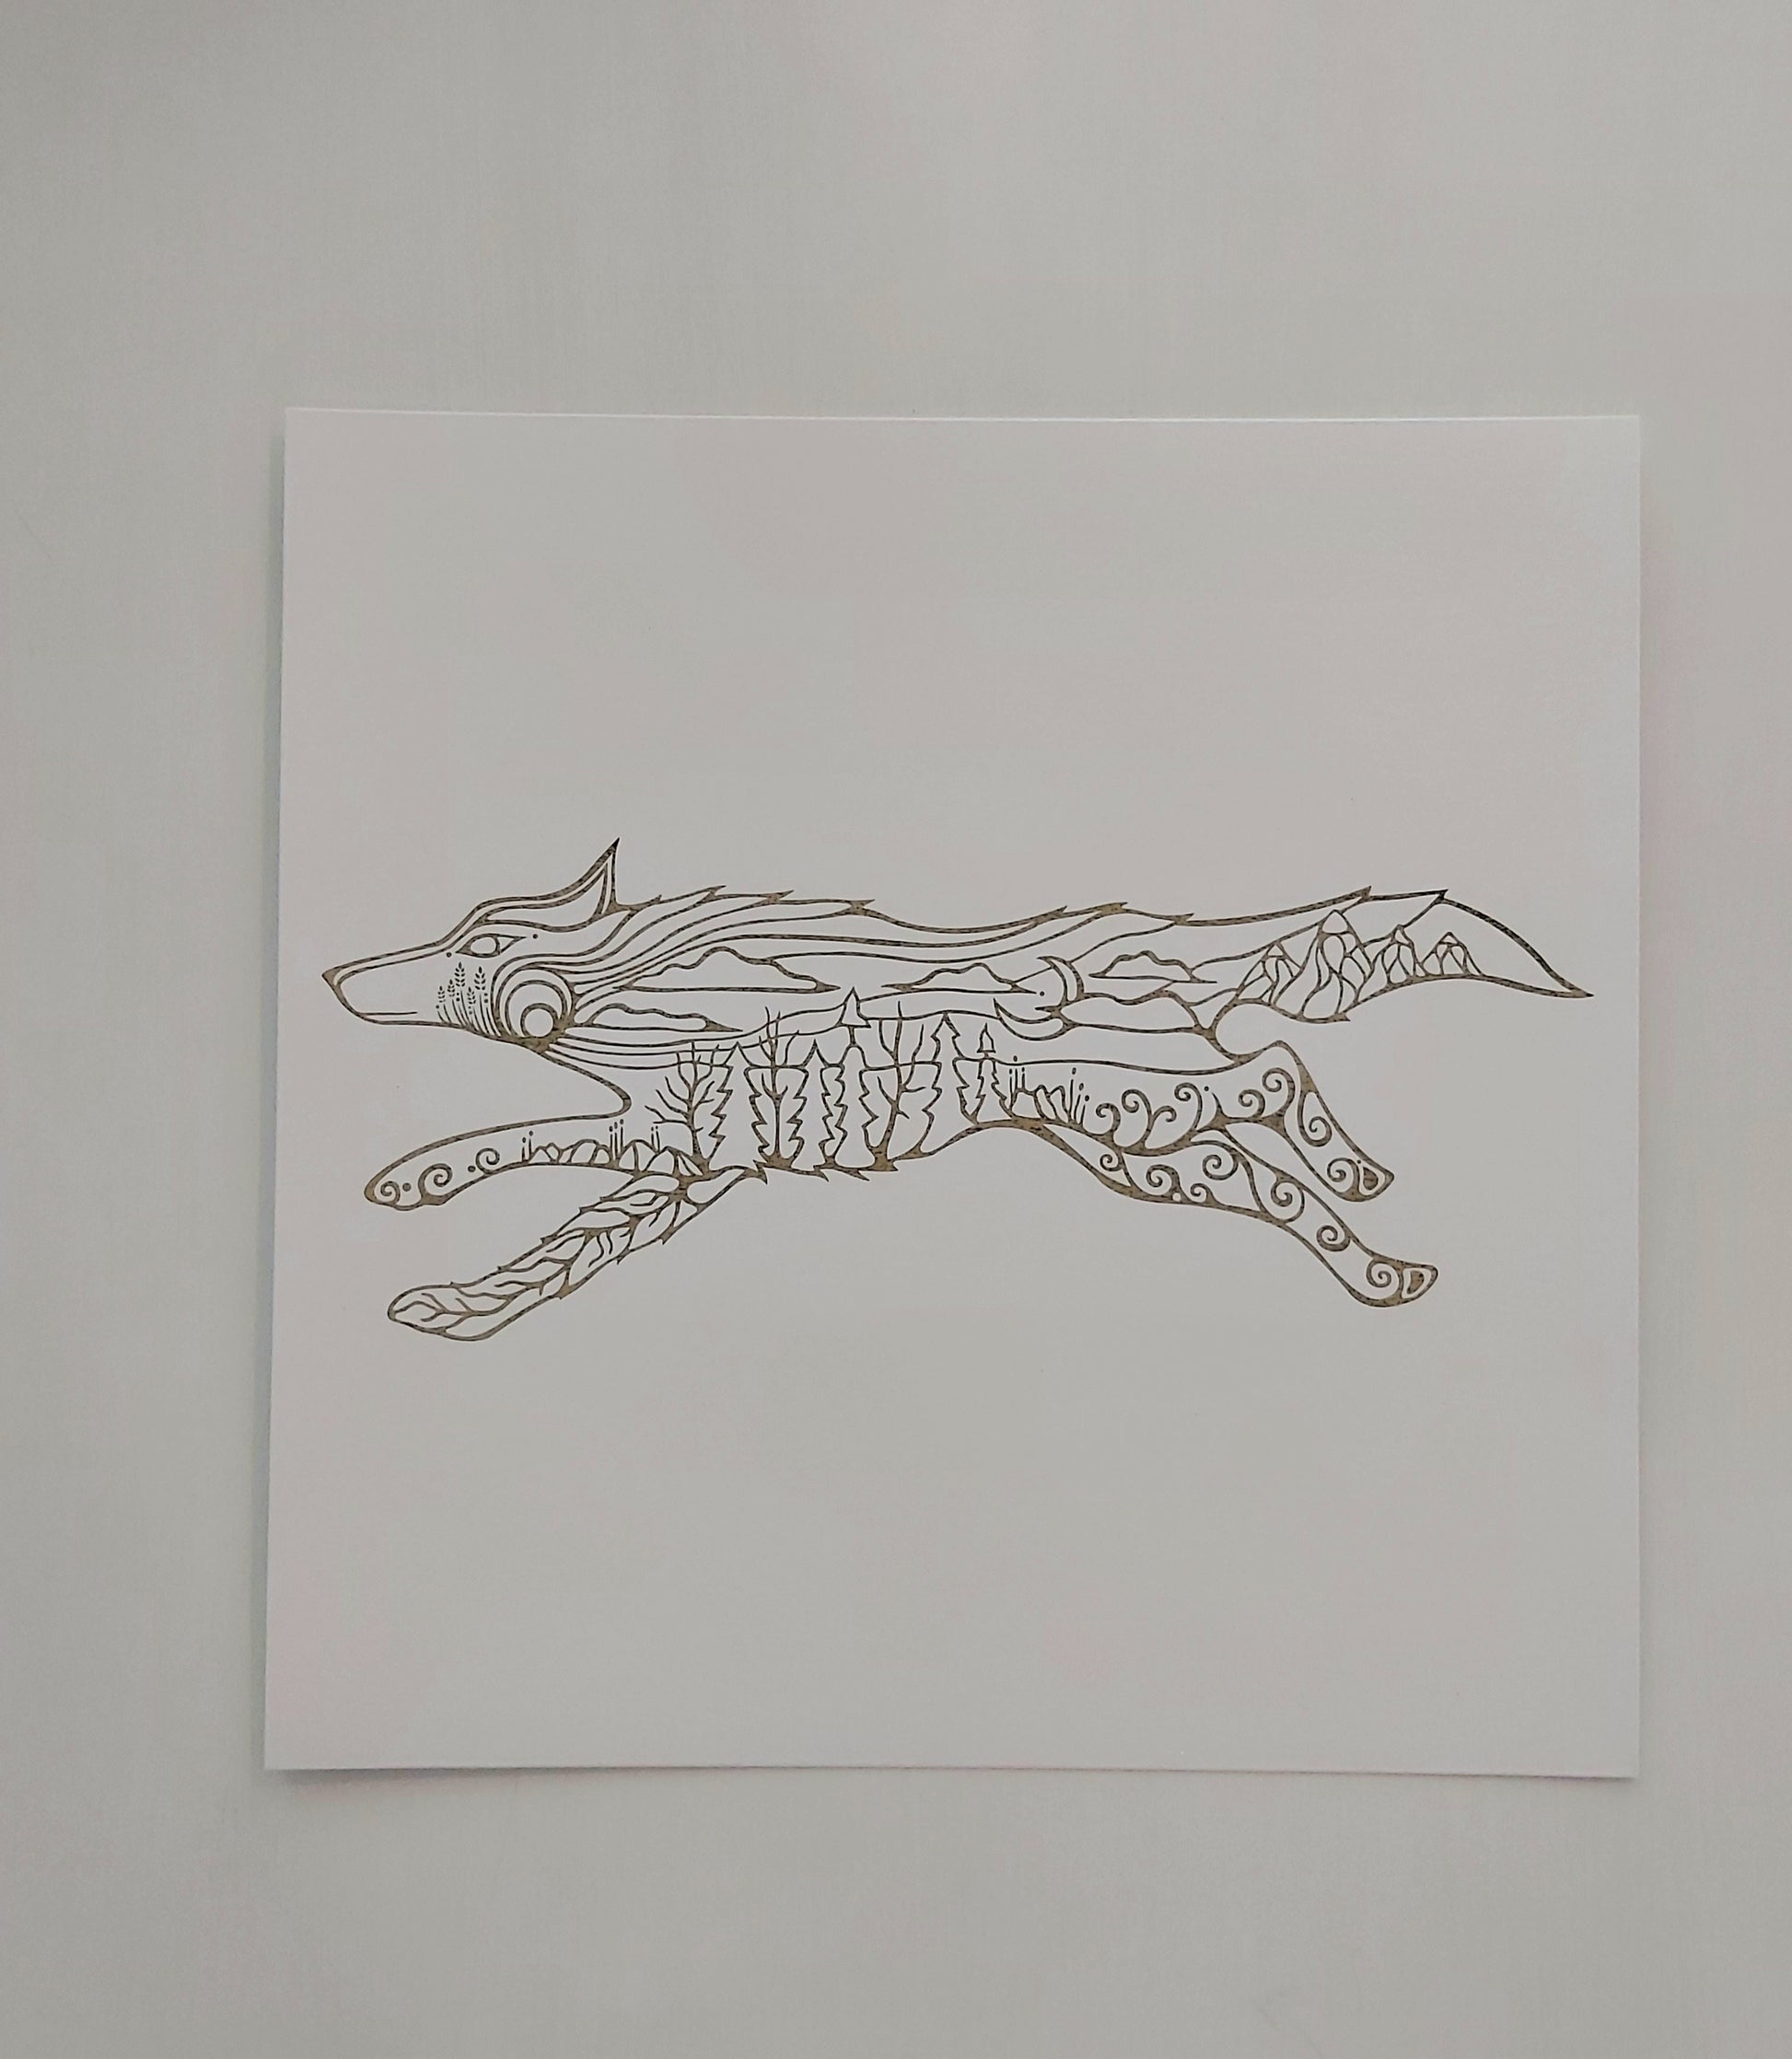 Print of Patrick Hunter's painting of a running wolf in woodland art style, gold leaf on white background.